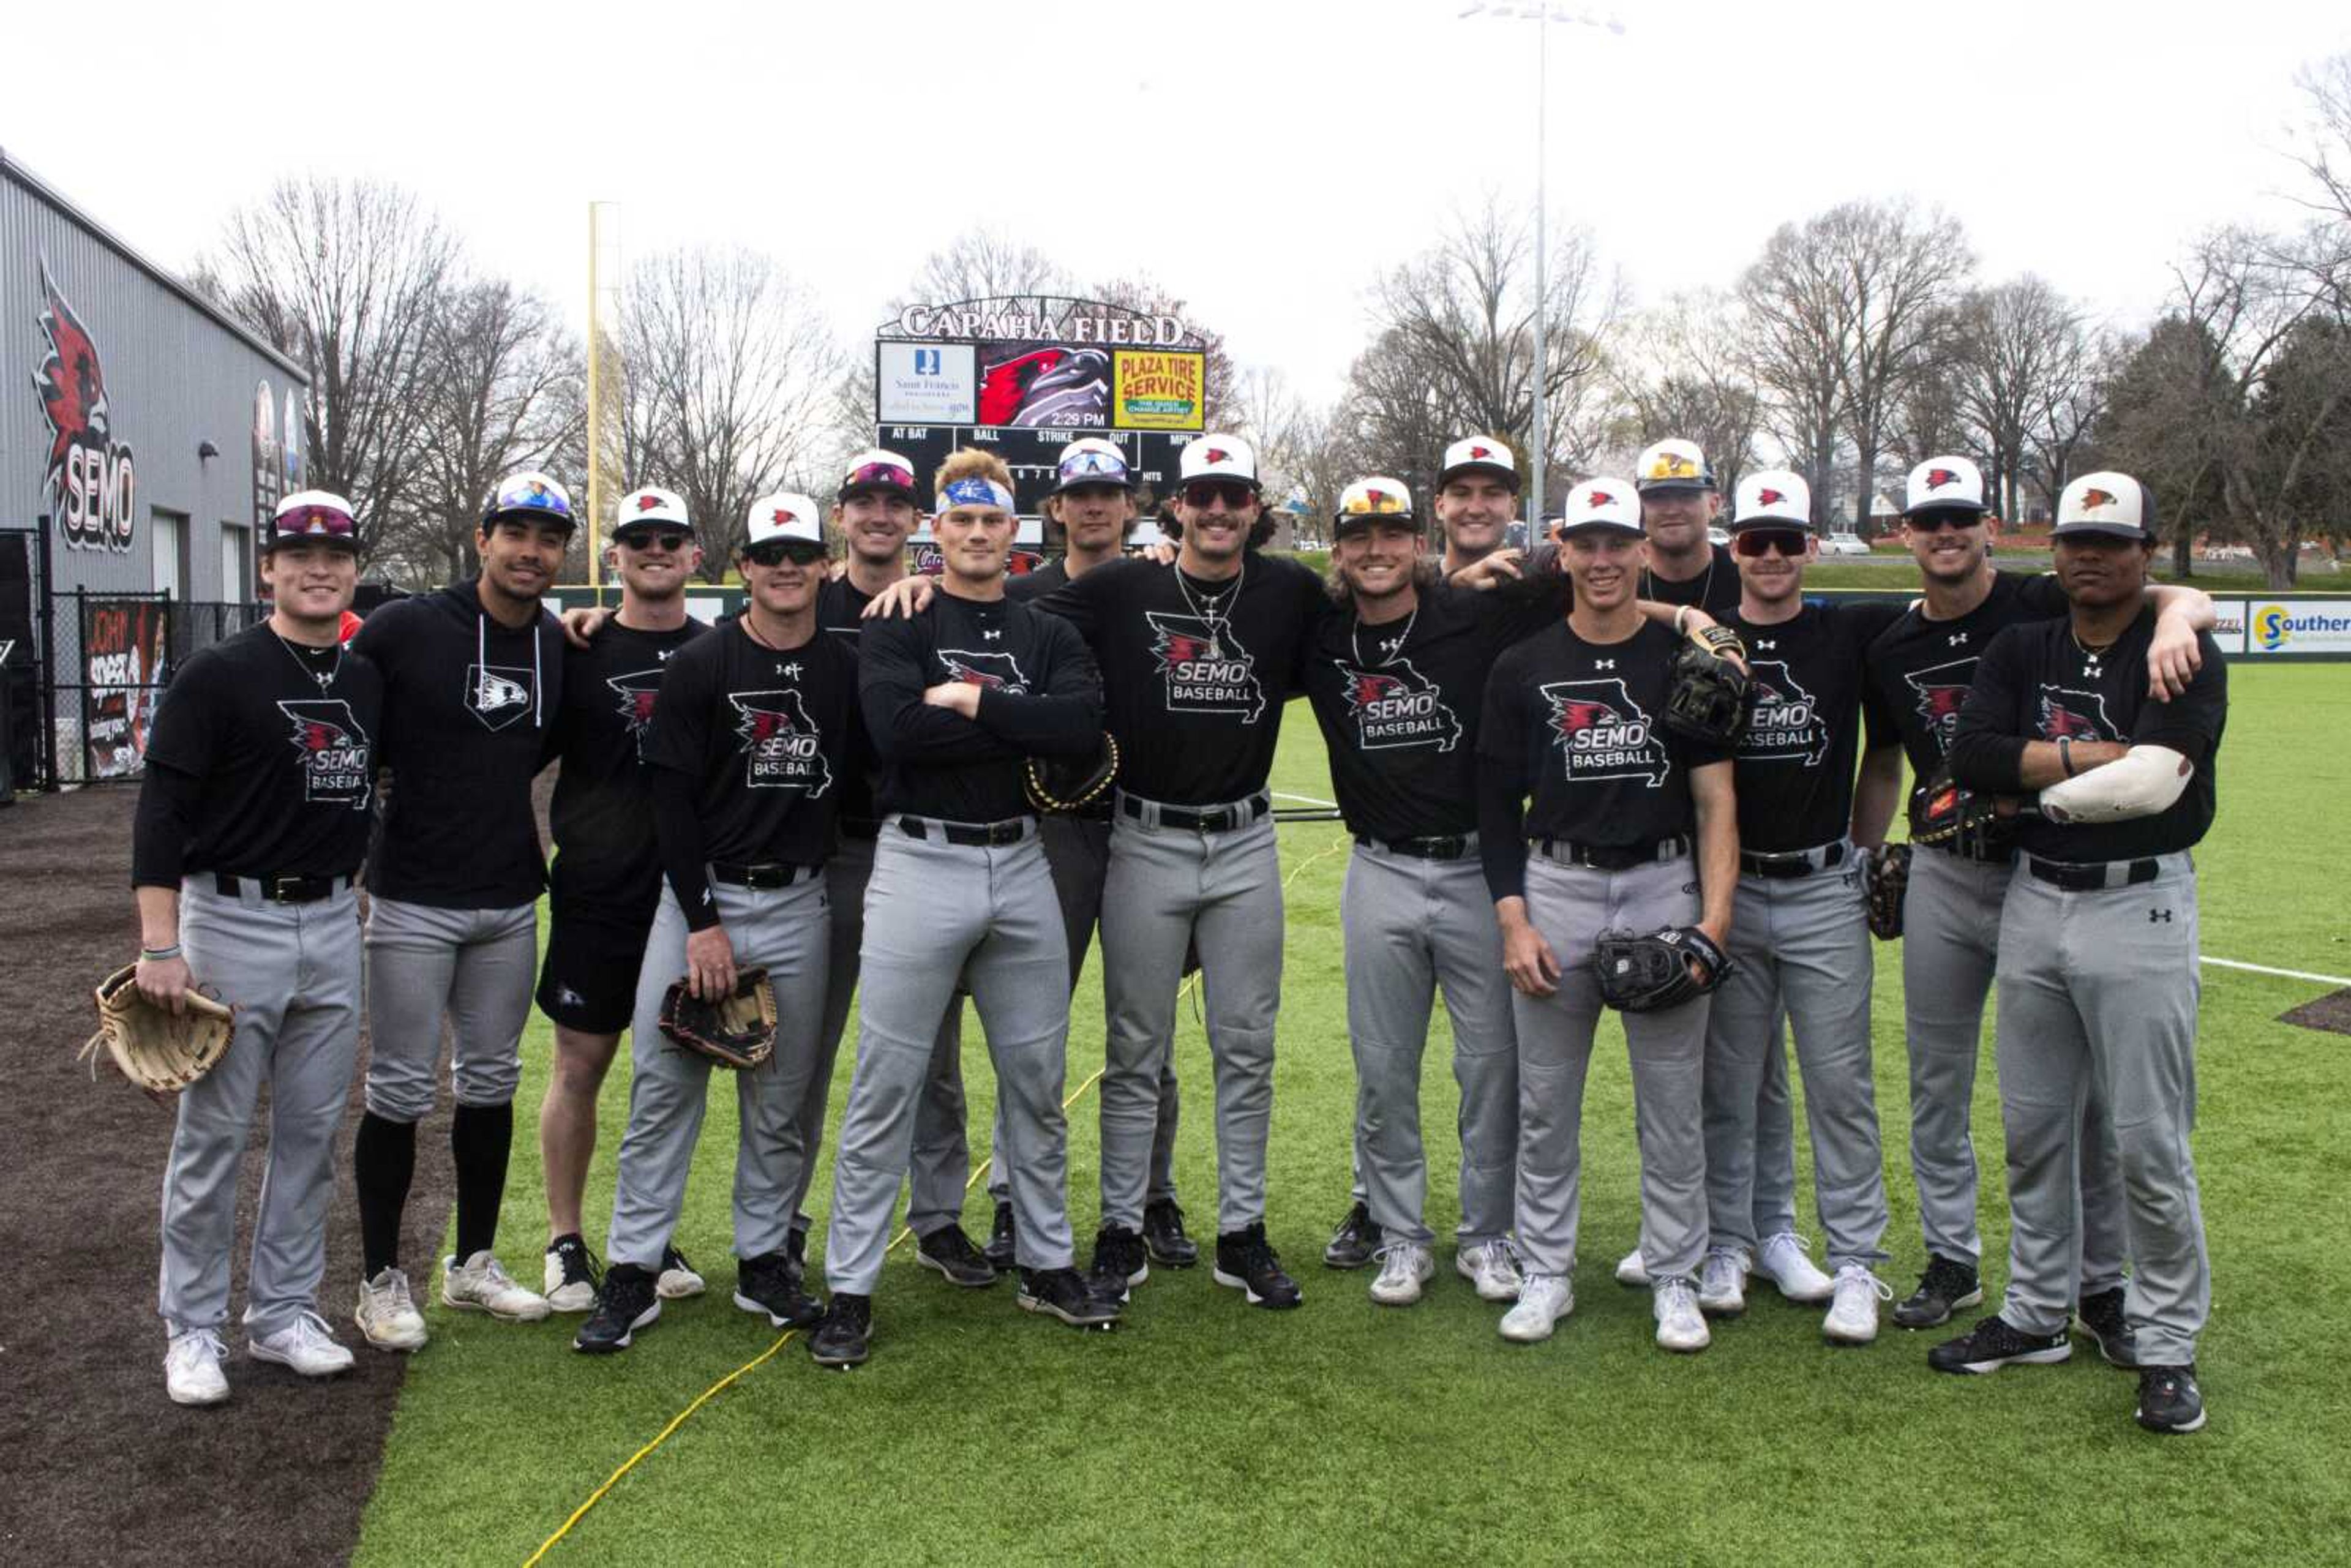 Redhawk baseball teammates (from left to right): Caleb Rodgers, Carlos Aranda, Ty Stauss, Peyton Leeper, Danny Sperling, Nolan Ackermann, Ben Palmer, Josh Cameron, Gunnar Doyle, Cole Warehime, Chance Resetich, Spencer Parker, Nathan MacLarend, Brett Graber, and Yanluis Ortis.  In Cameron’s interview, he described himself as “more of a team guy than an ‘I’ guy.” When asked to pose for a photo, he requested that some of his teammates get in the photo because they were ‘all a part of this together.’